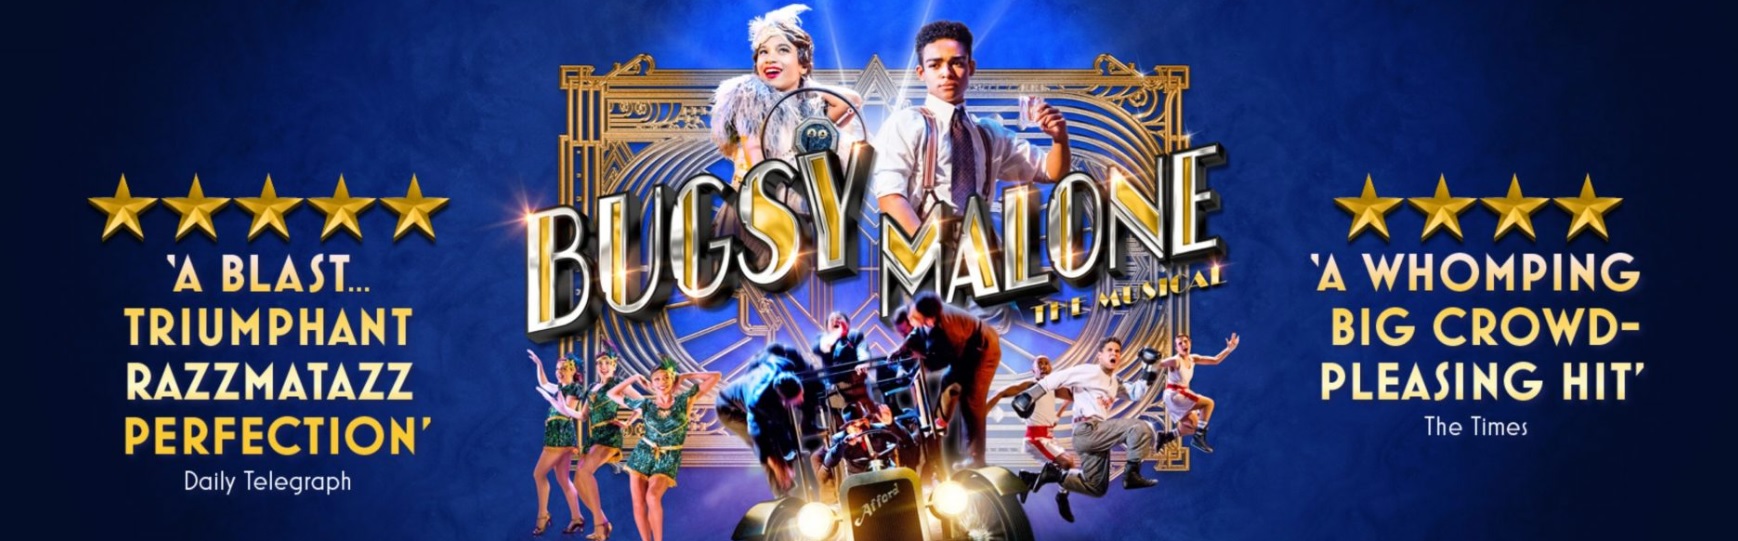 Bugsy Malone the Musical - UK tour